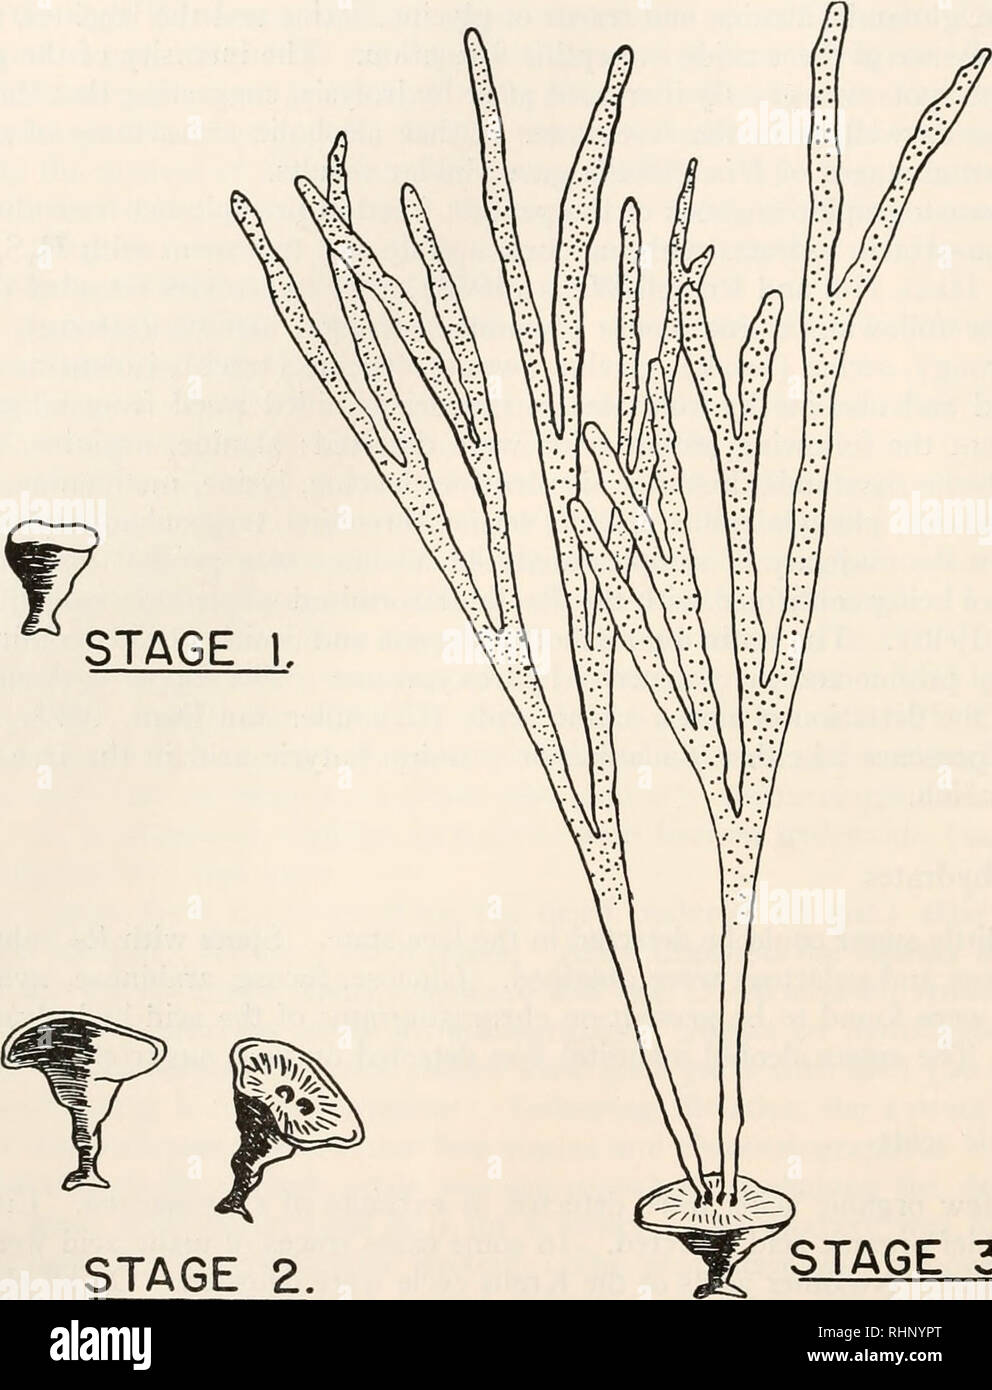 . The Biological bulletin. Biology; Zoology; Biology; Marine Biology. 172 RAYMOND F. JONES STAGE I, STAGE 2. STAGE 3. FIGURE 1. Stages of development of Himanthalia used in the chemical analysis, July, 1953: Stage 1. Young vegetative buttons, 1-1.5 cm. in length and tubular in form. Stage 2. Fully grown vegetative buttons. Stage 3. Mature plants composed of buttons, from which were given off long mature receptacles some 50-60 cm. in length. The receptacles were separated from the buttons, and further sorted into male and female for separate analysis. for total nitrogen, protein nitrogen and no Stock Photo